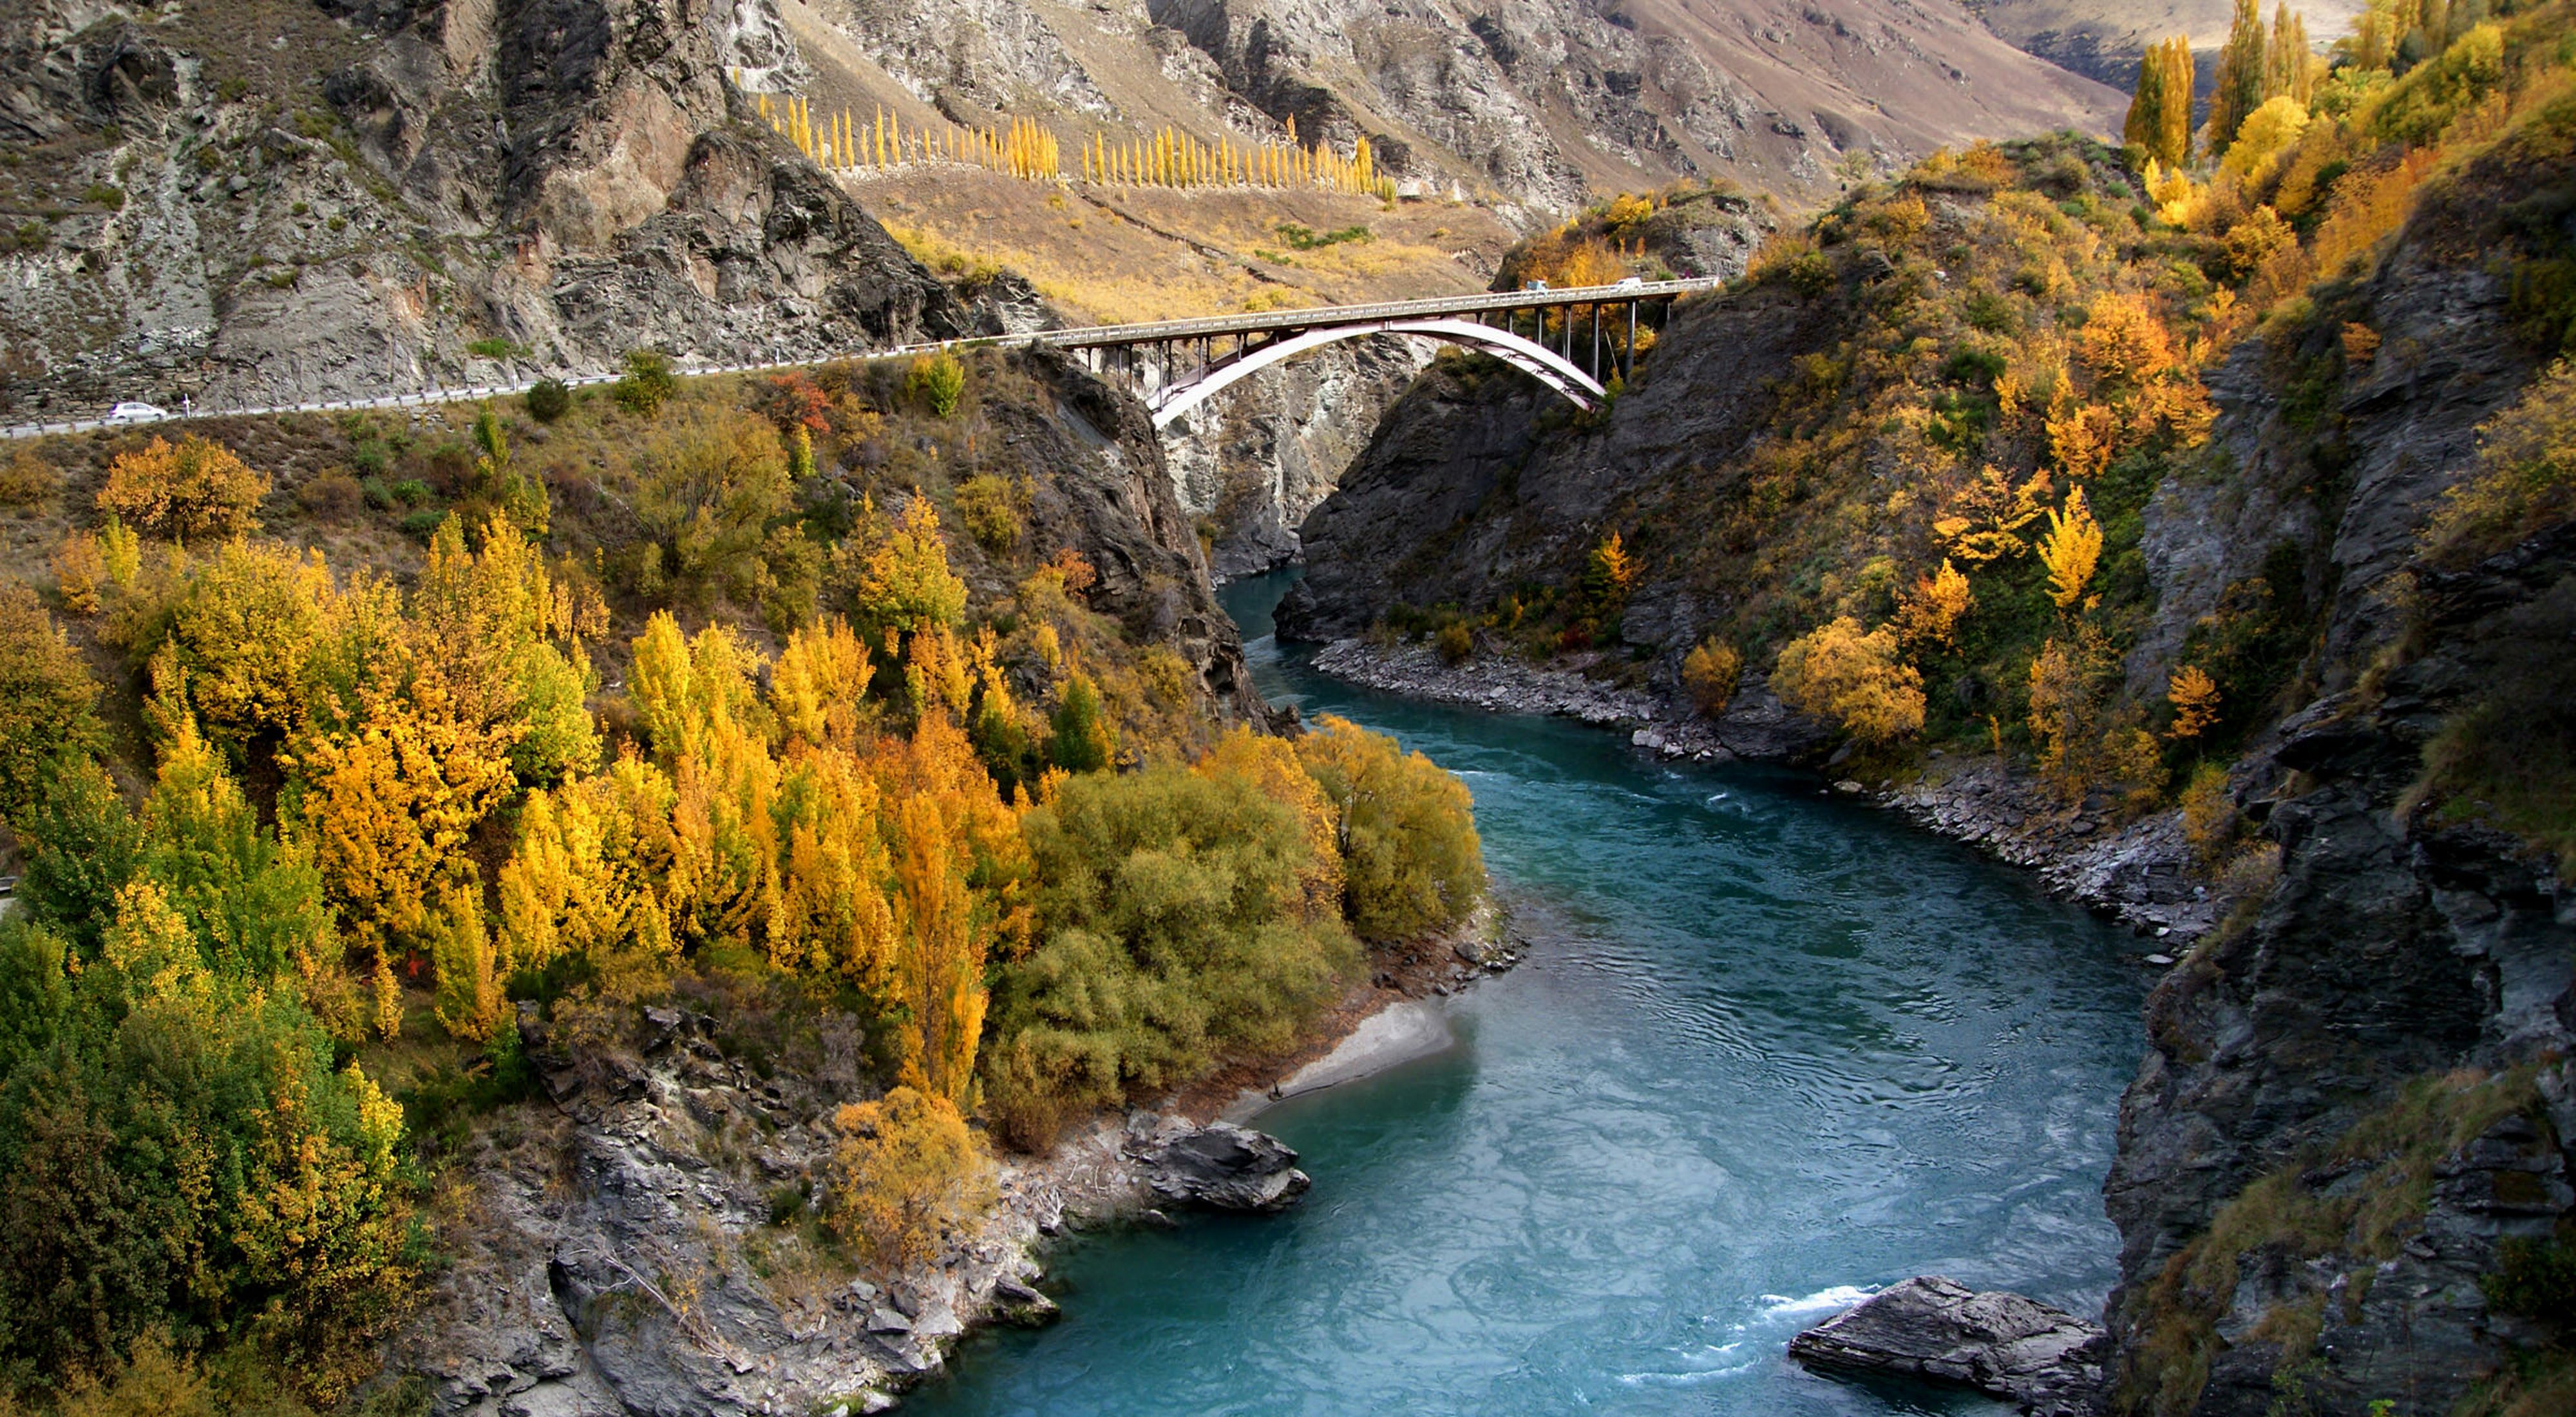 The Kawarau River flows through the gorge. The Kawarau Gorge is a located in Central Otago, in the South Island of New Zealand.